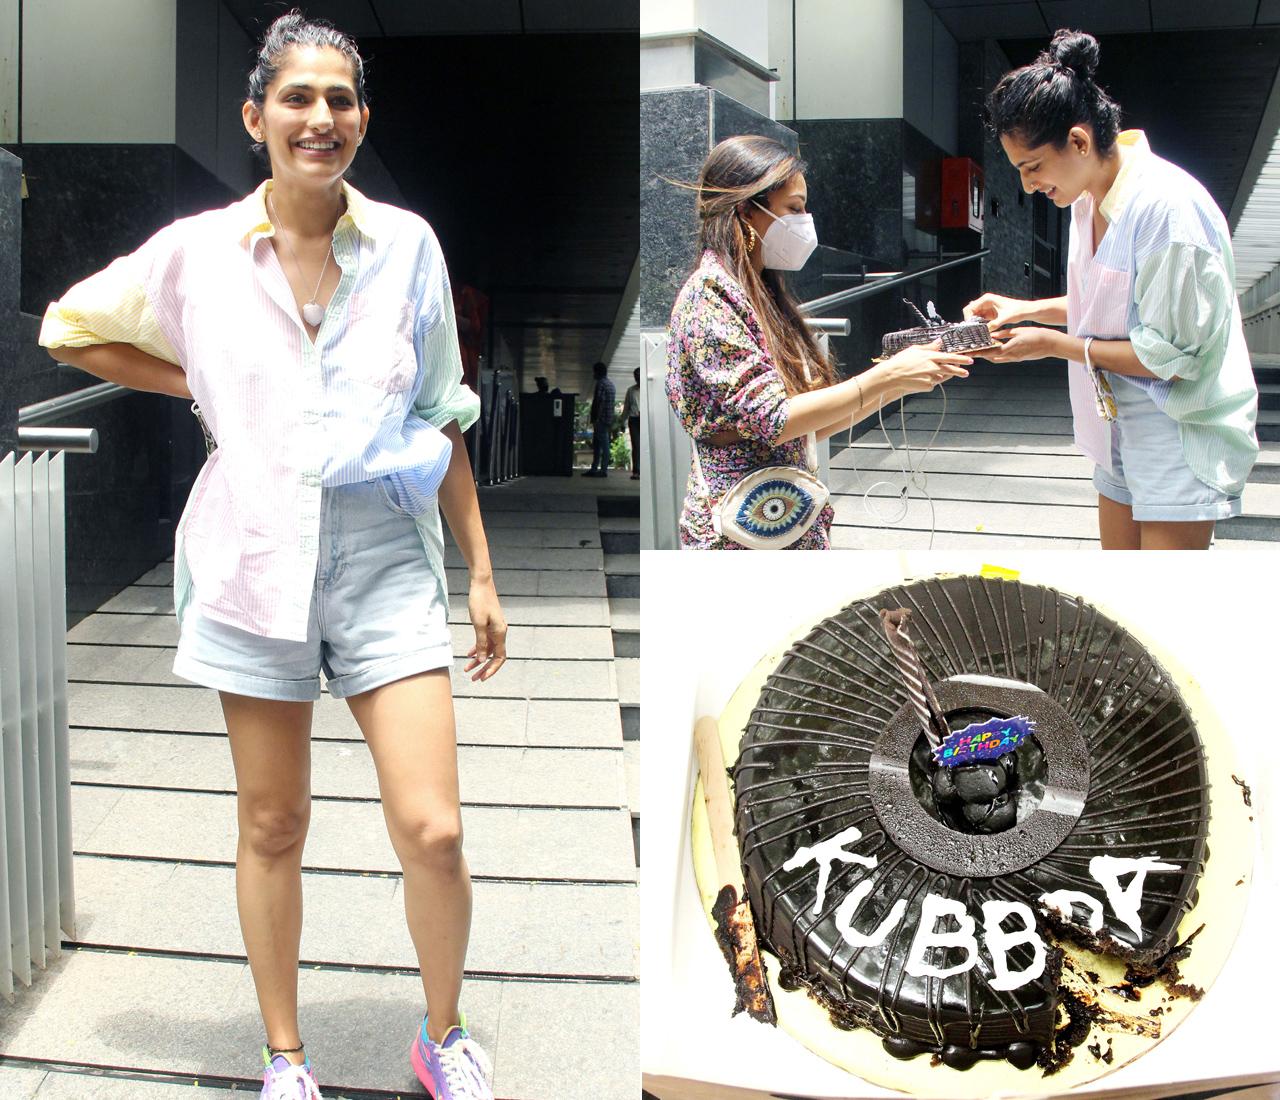 It was actress Kubbra Sait's birthday on July 27. And the actress was seen cutting her birthday cake in front of the paparazzi, outside a popular restaurant in Bandra, Mumbai.